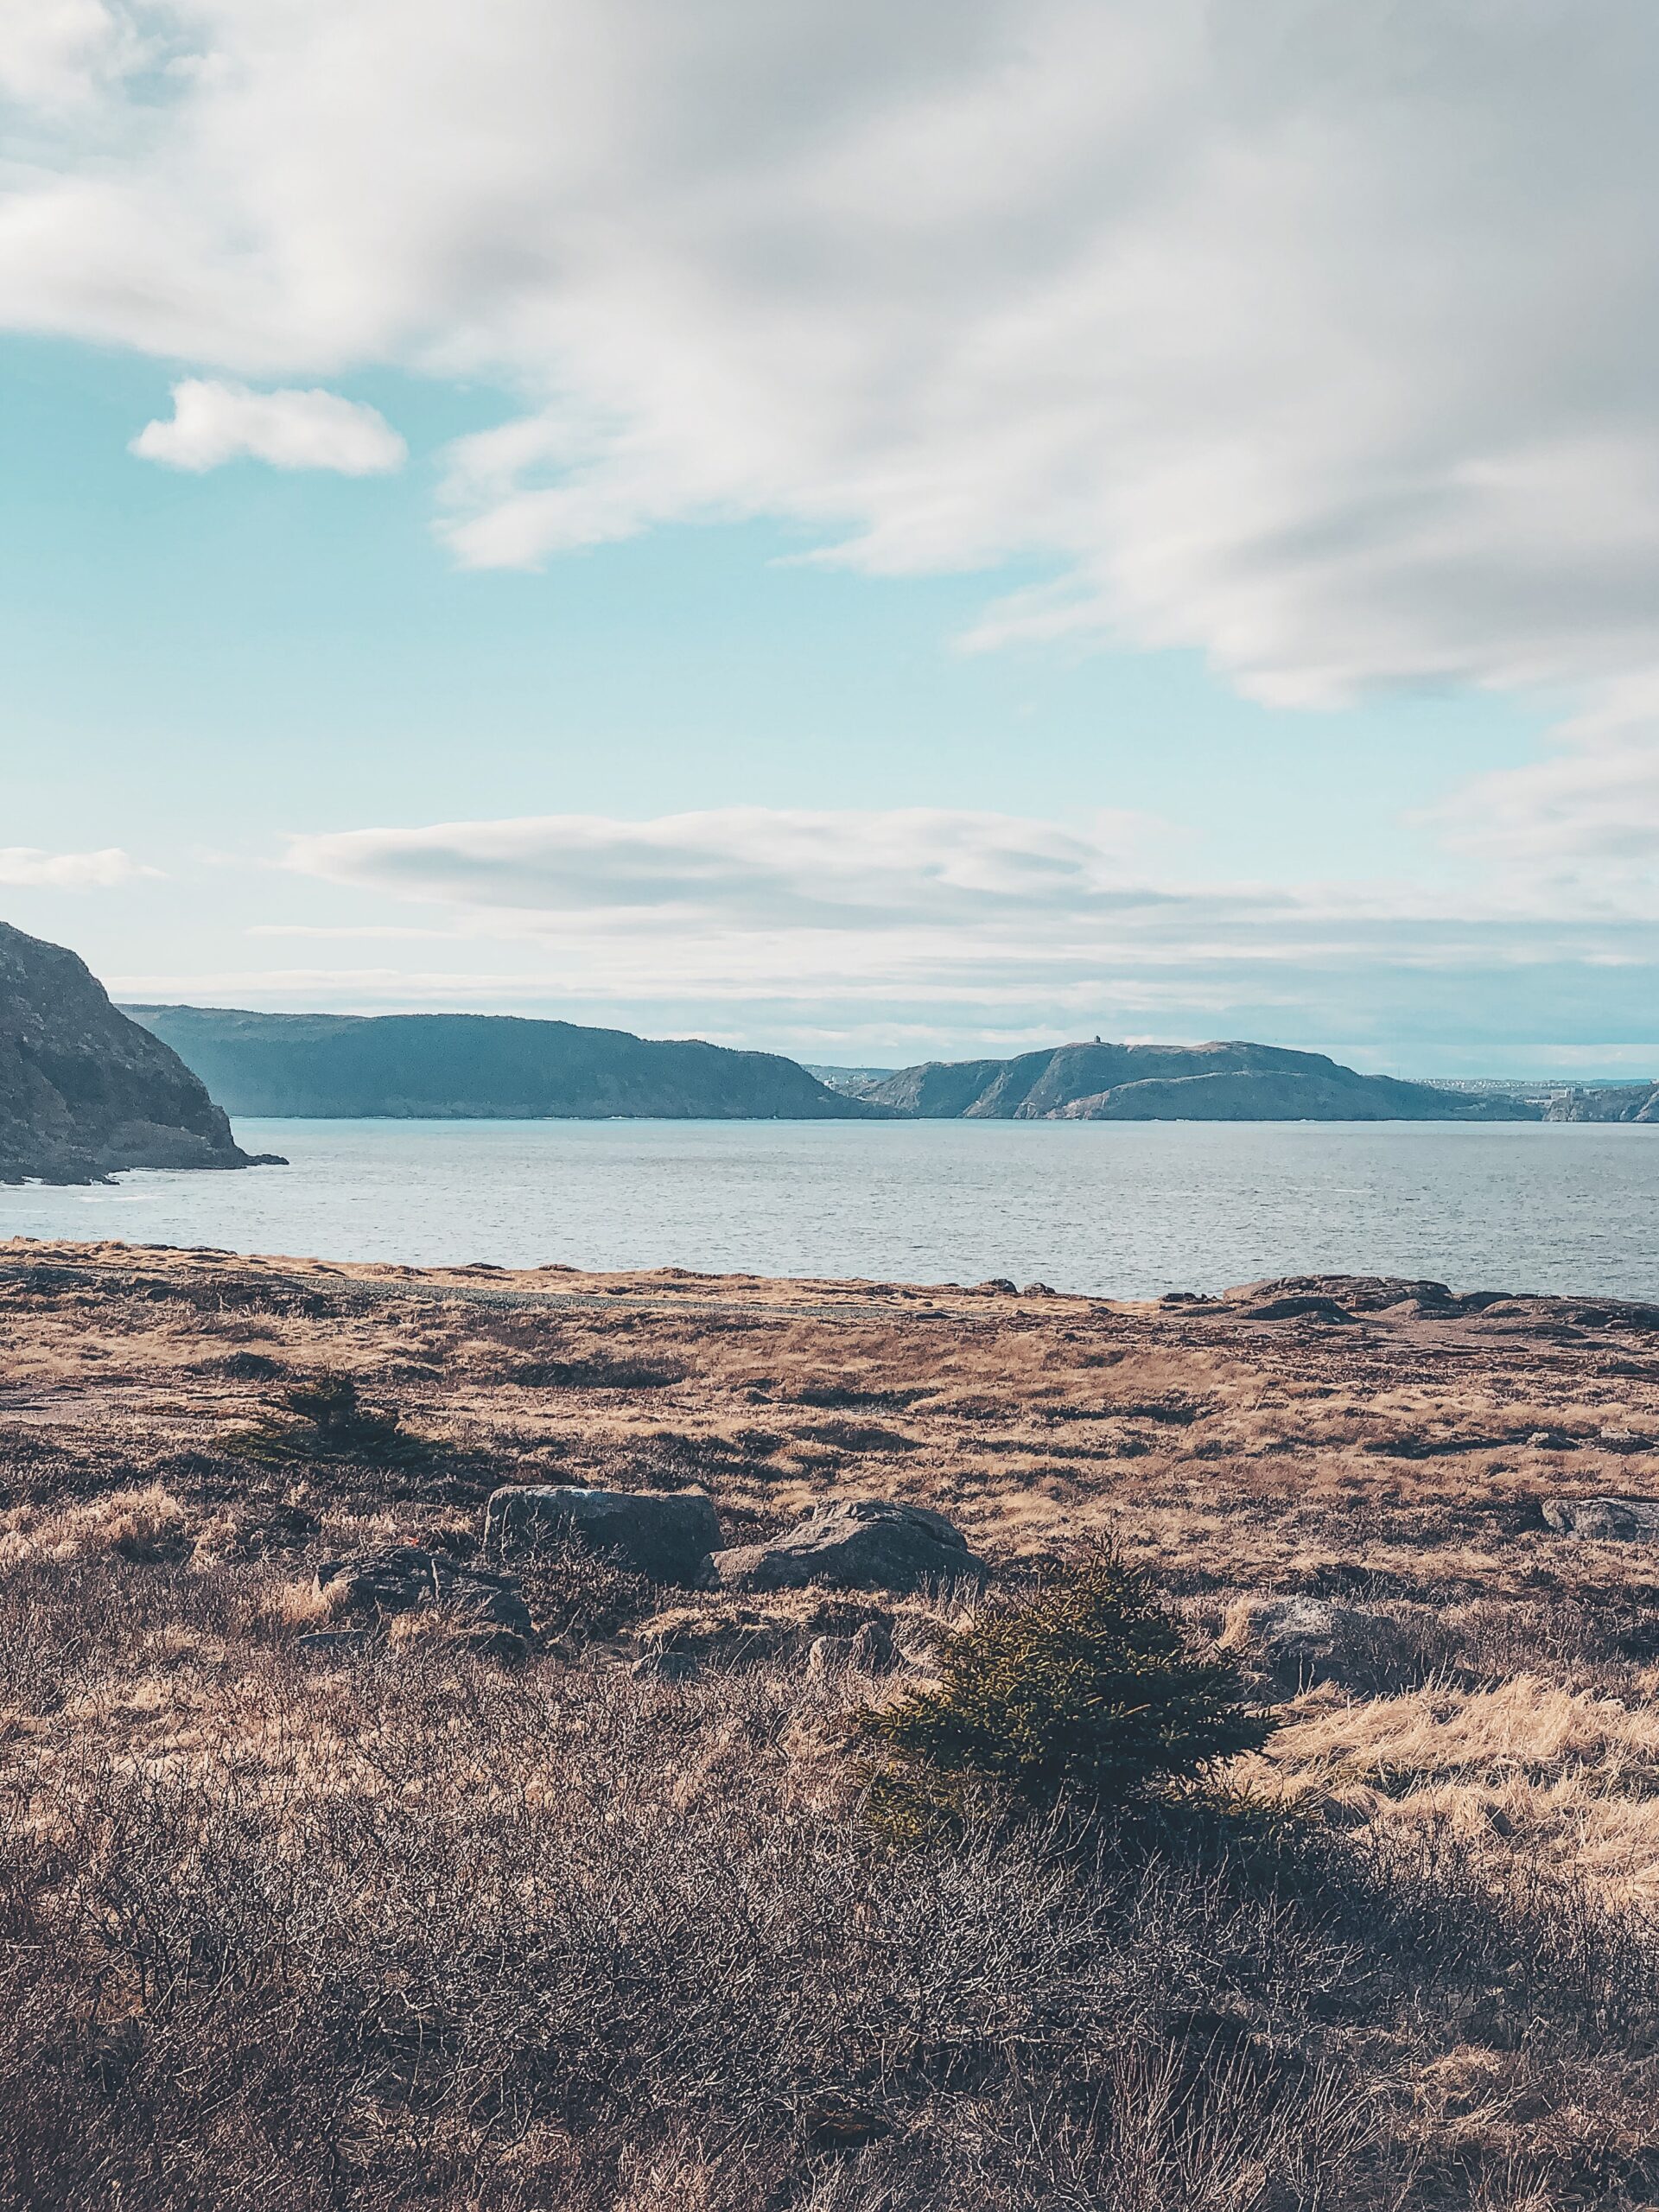 A photo of the land just before the ocean, with a very small view of Signal Hill and Cabot Tower in the background.